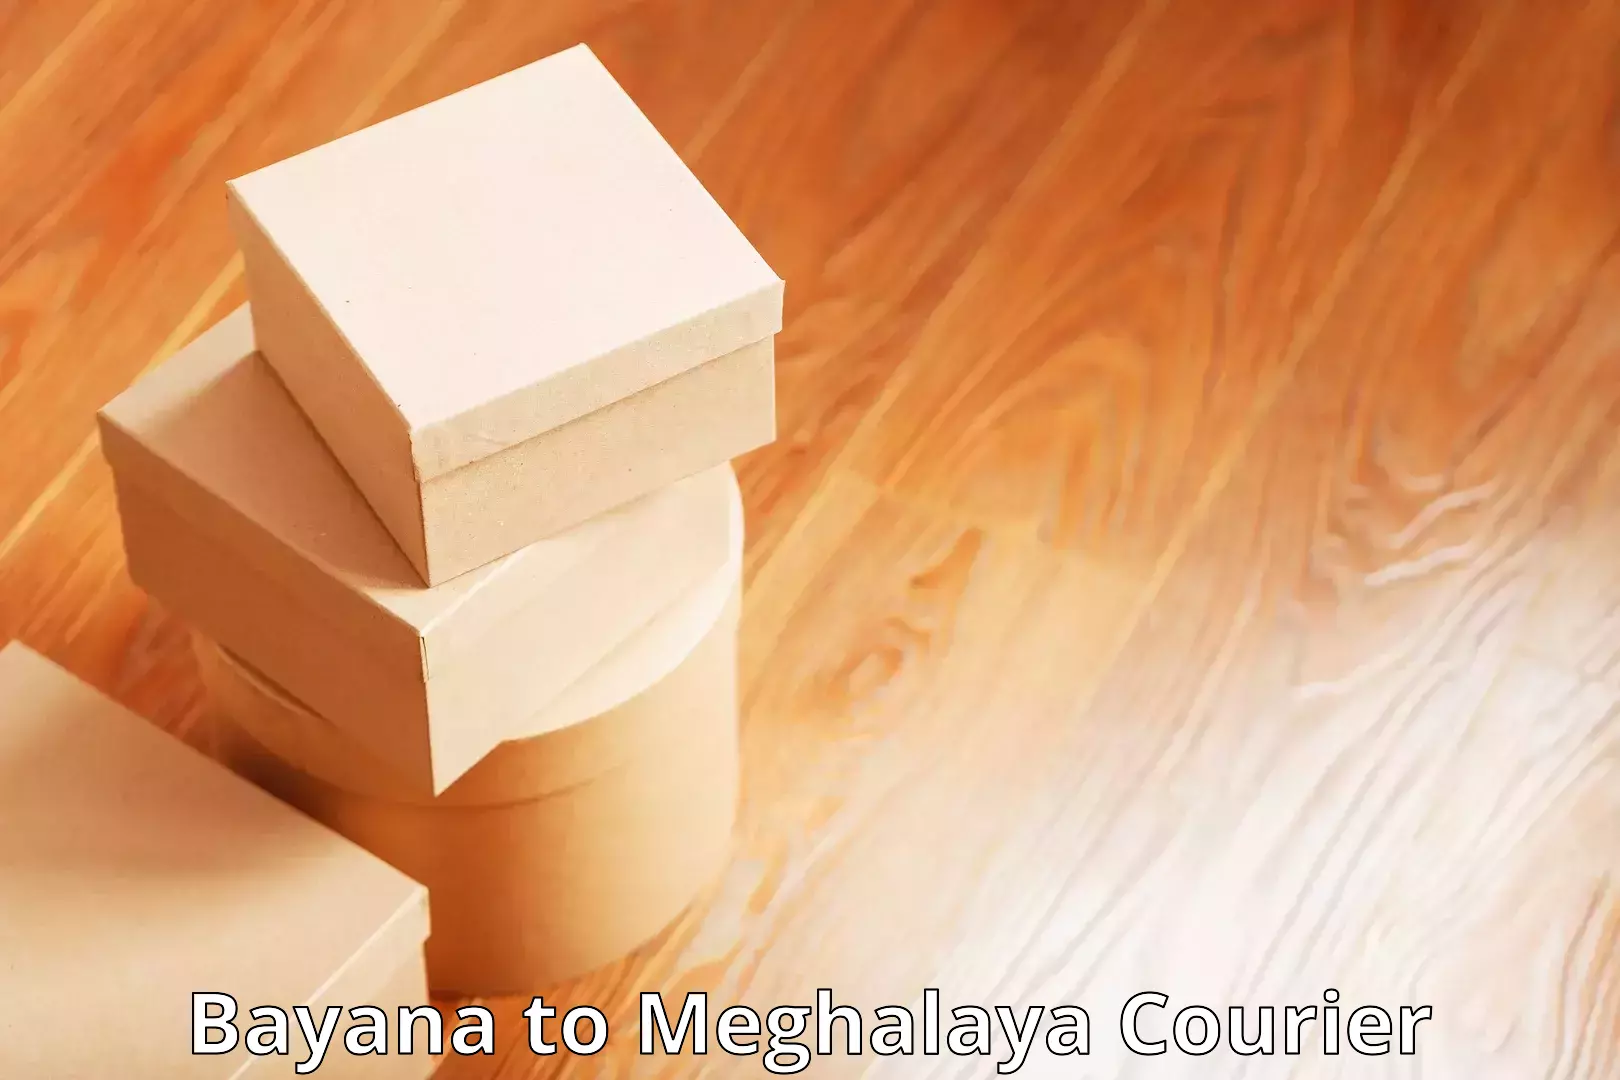 State-of-the-art courier technology Bayana to Meghalaya